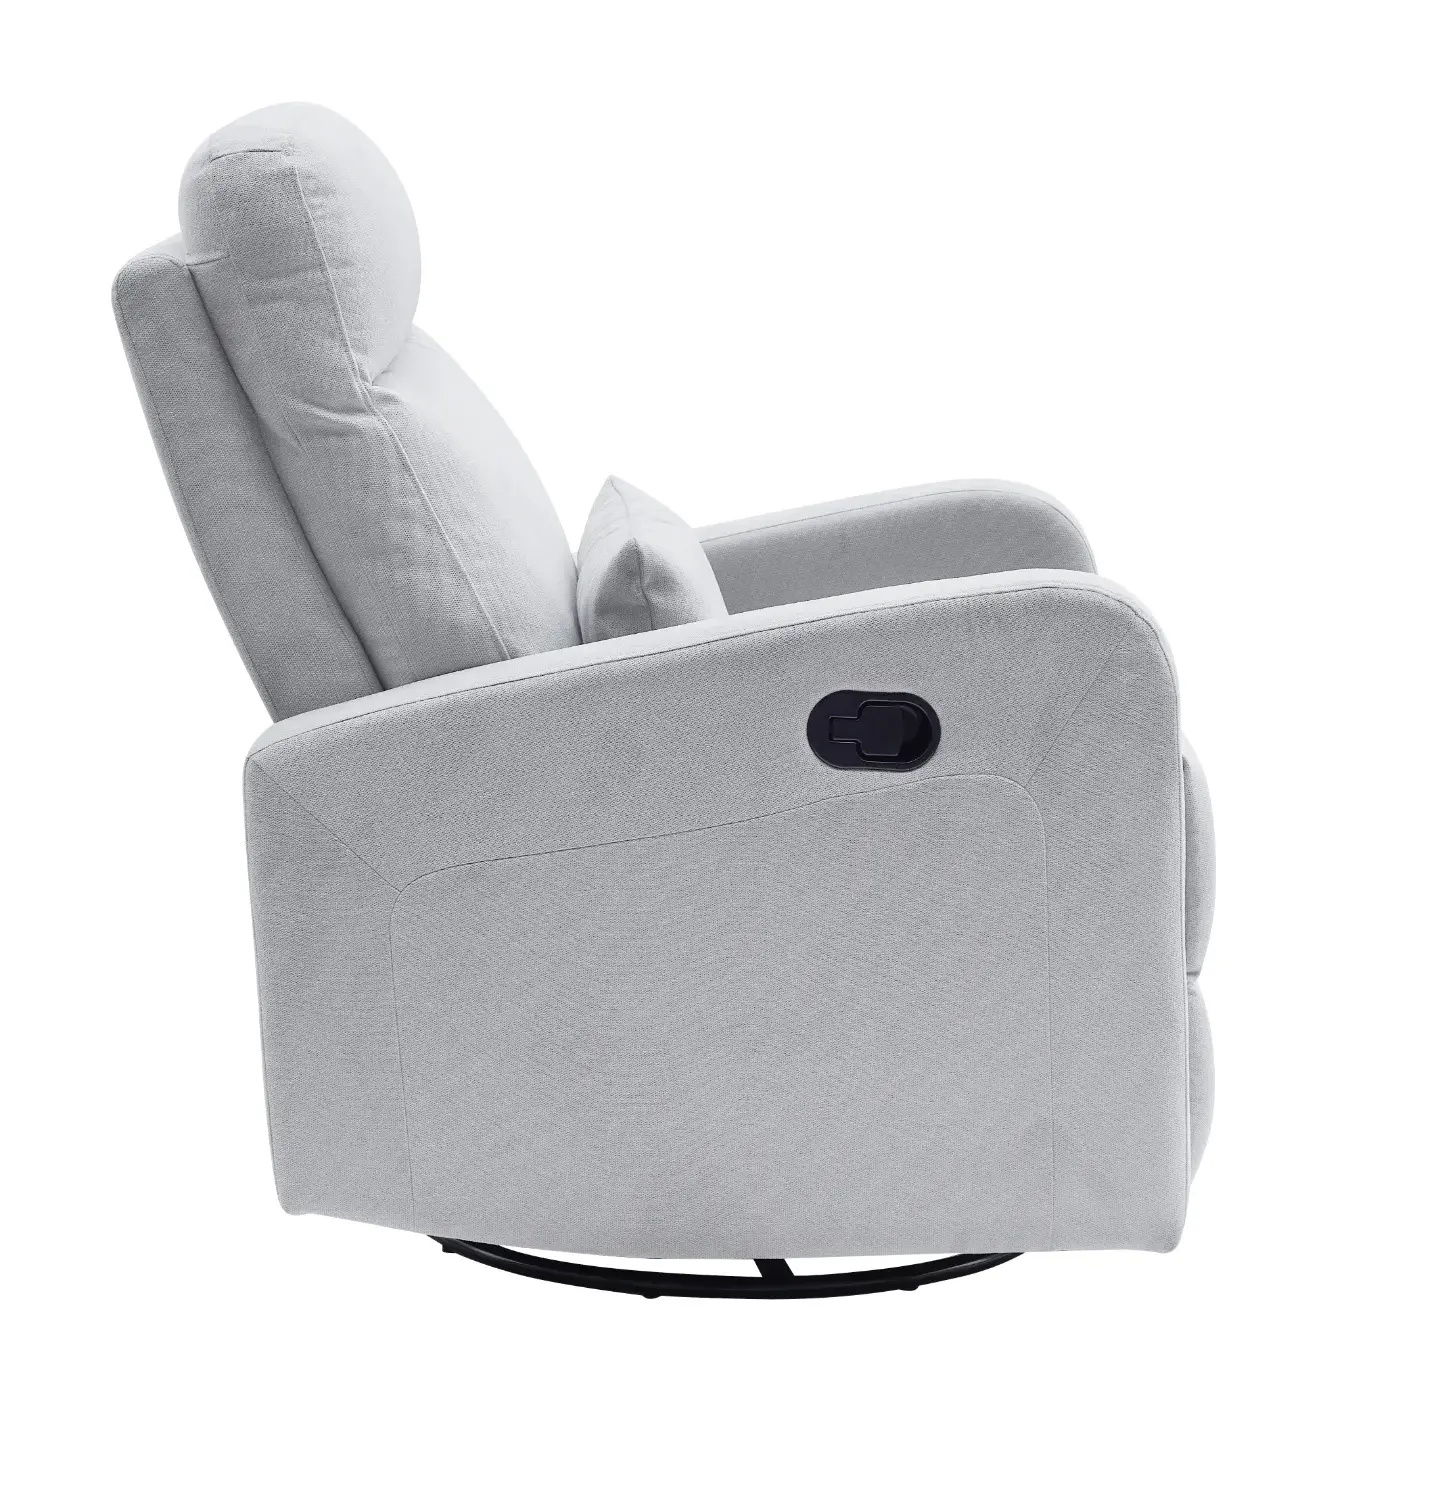 Cocoon Cocoon Plush Reclining Glider Chair Pebble Grey